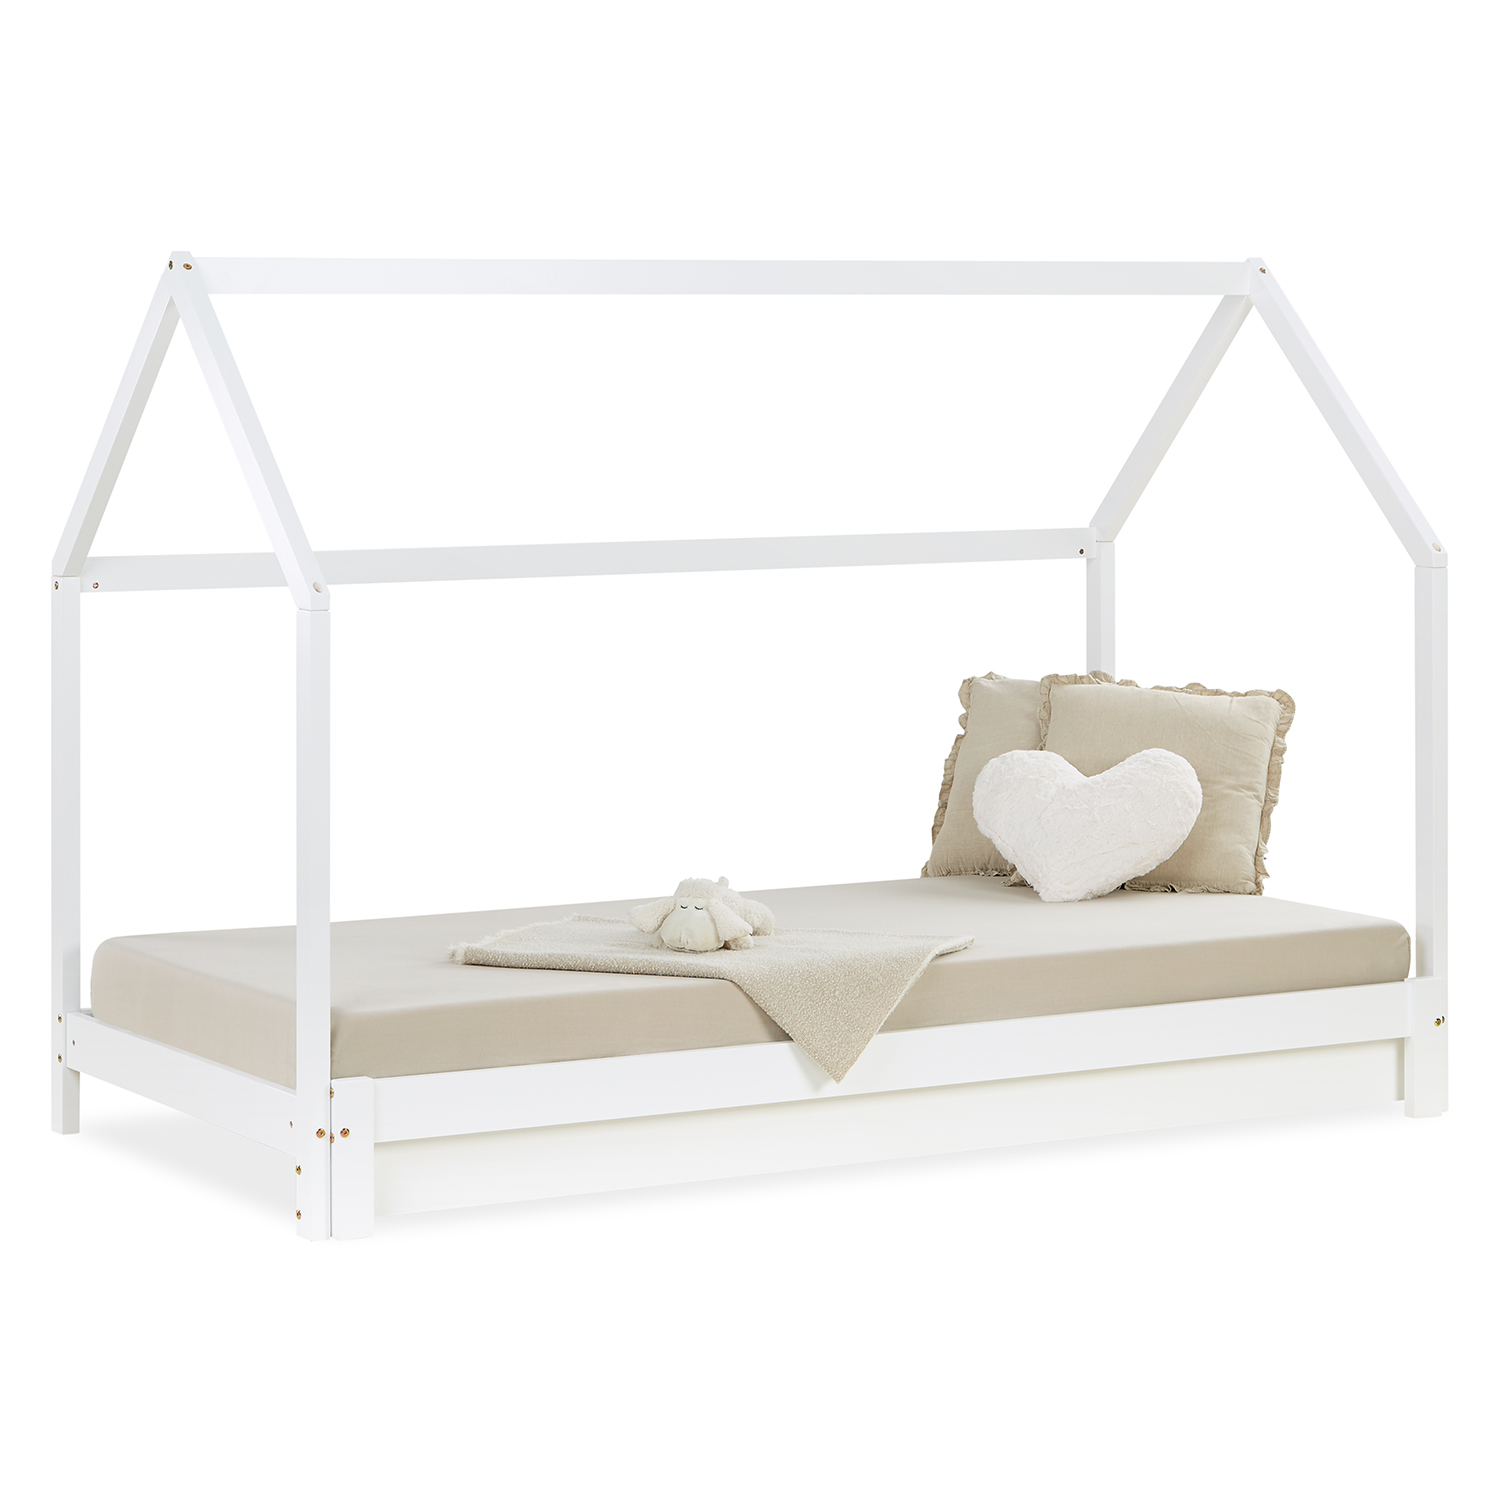 Children's Bed with Pull Out Bed 90x200 cm House Bed 2 Mattresses Bed Slats Treehouse Bed Children's Single Bed Wooden Frame White Trundle